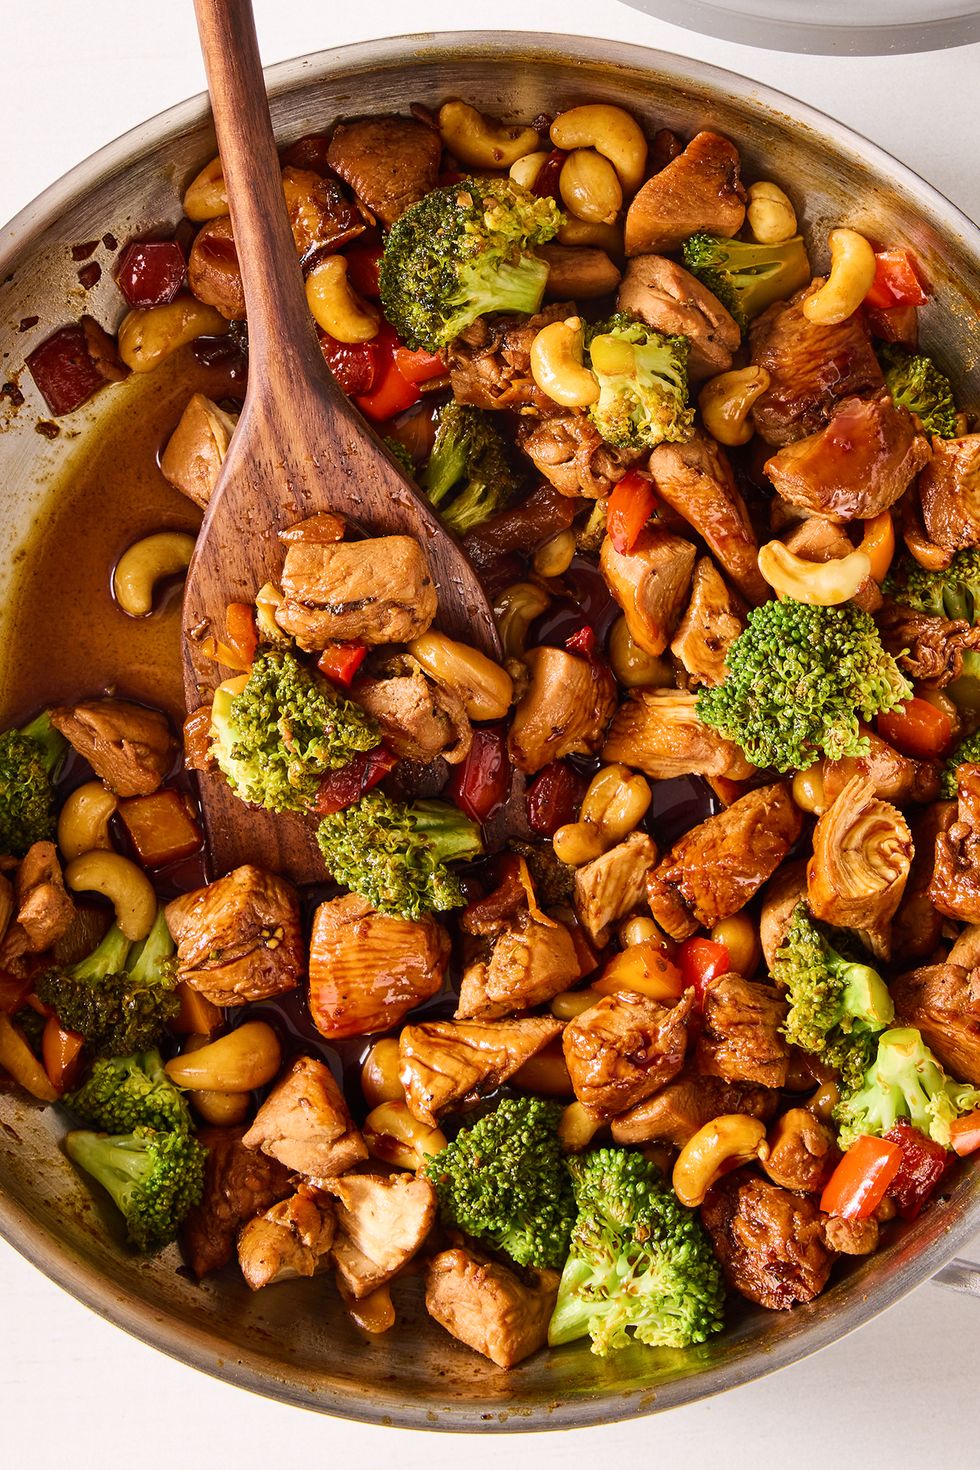 chicken stir fry with broccoli, cashews, and red pepper